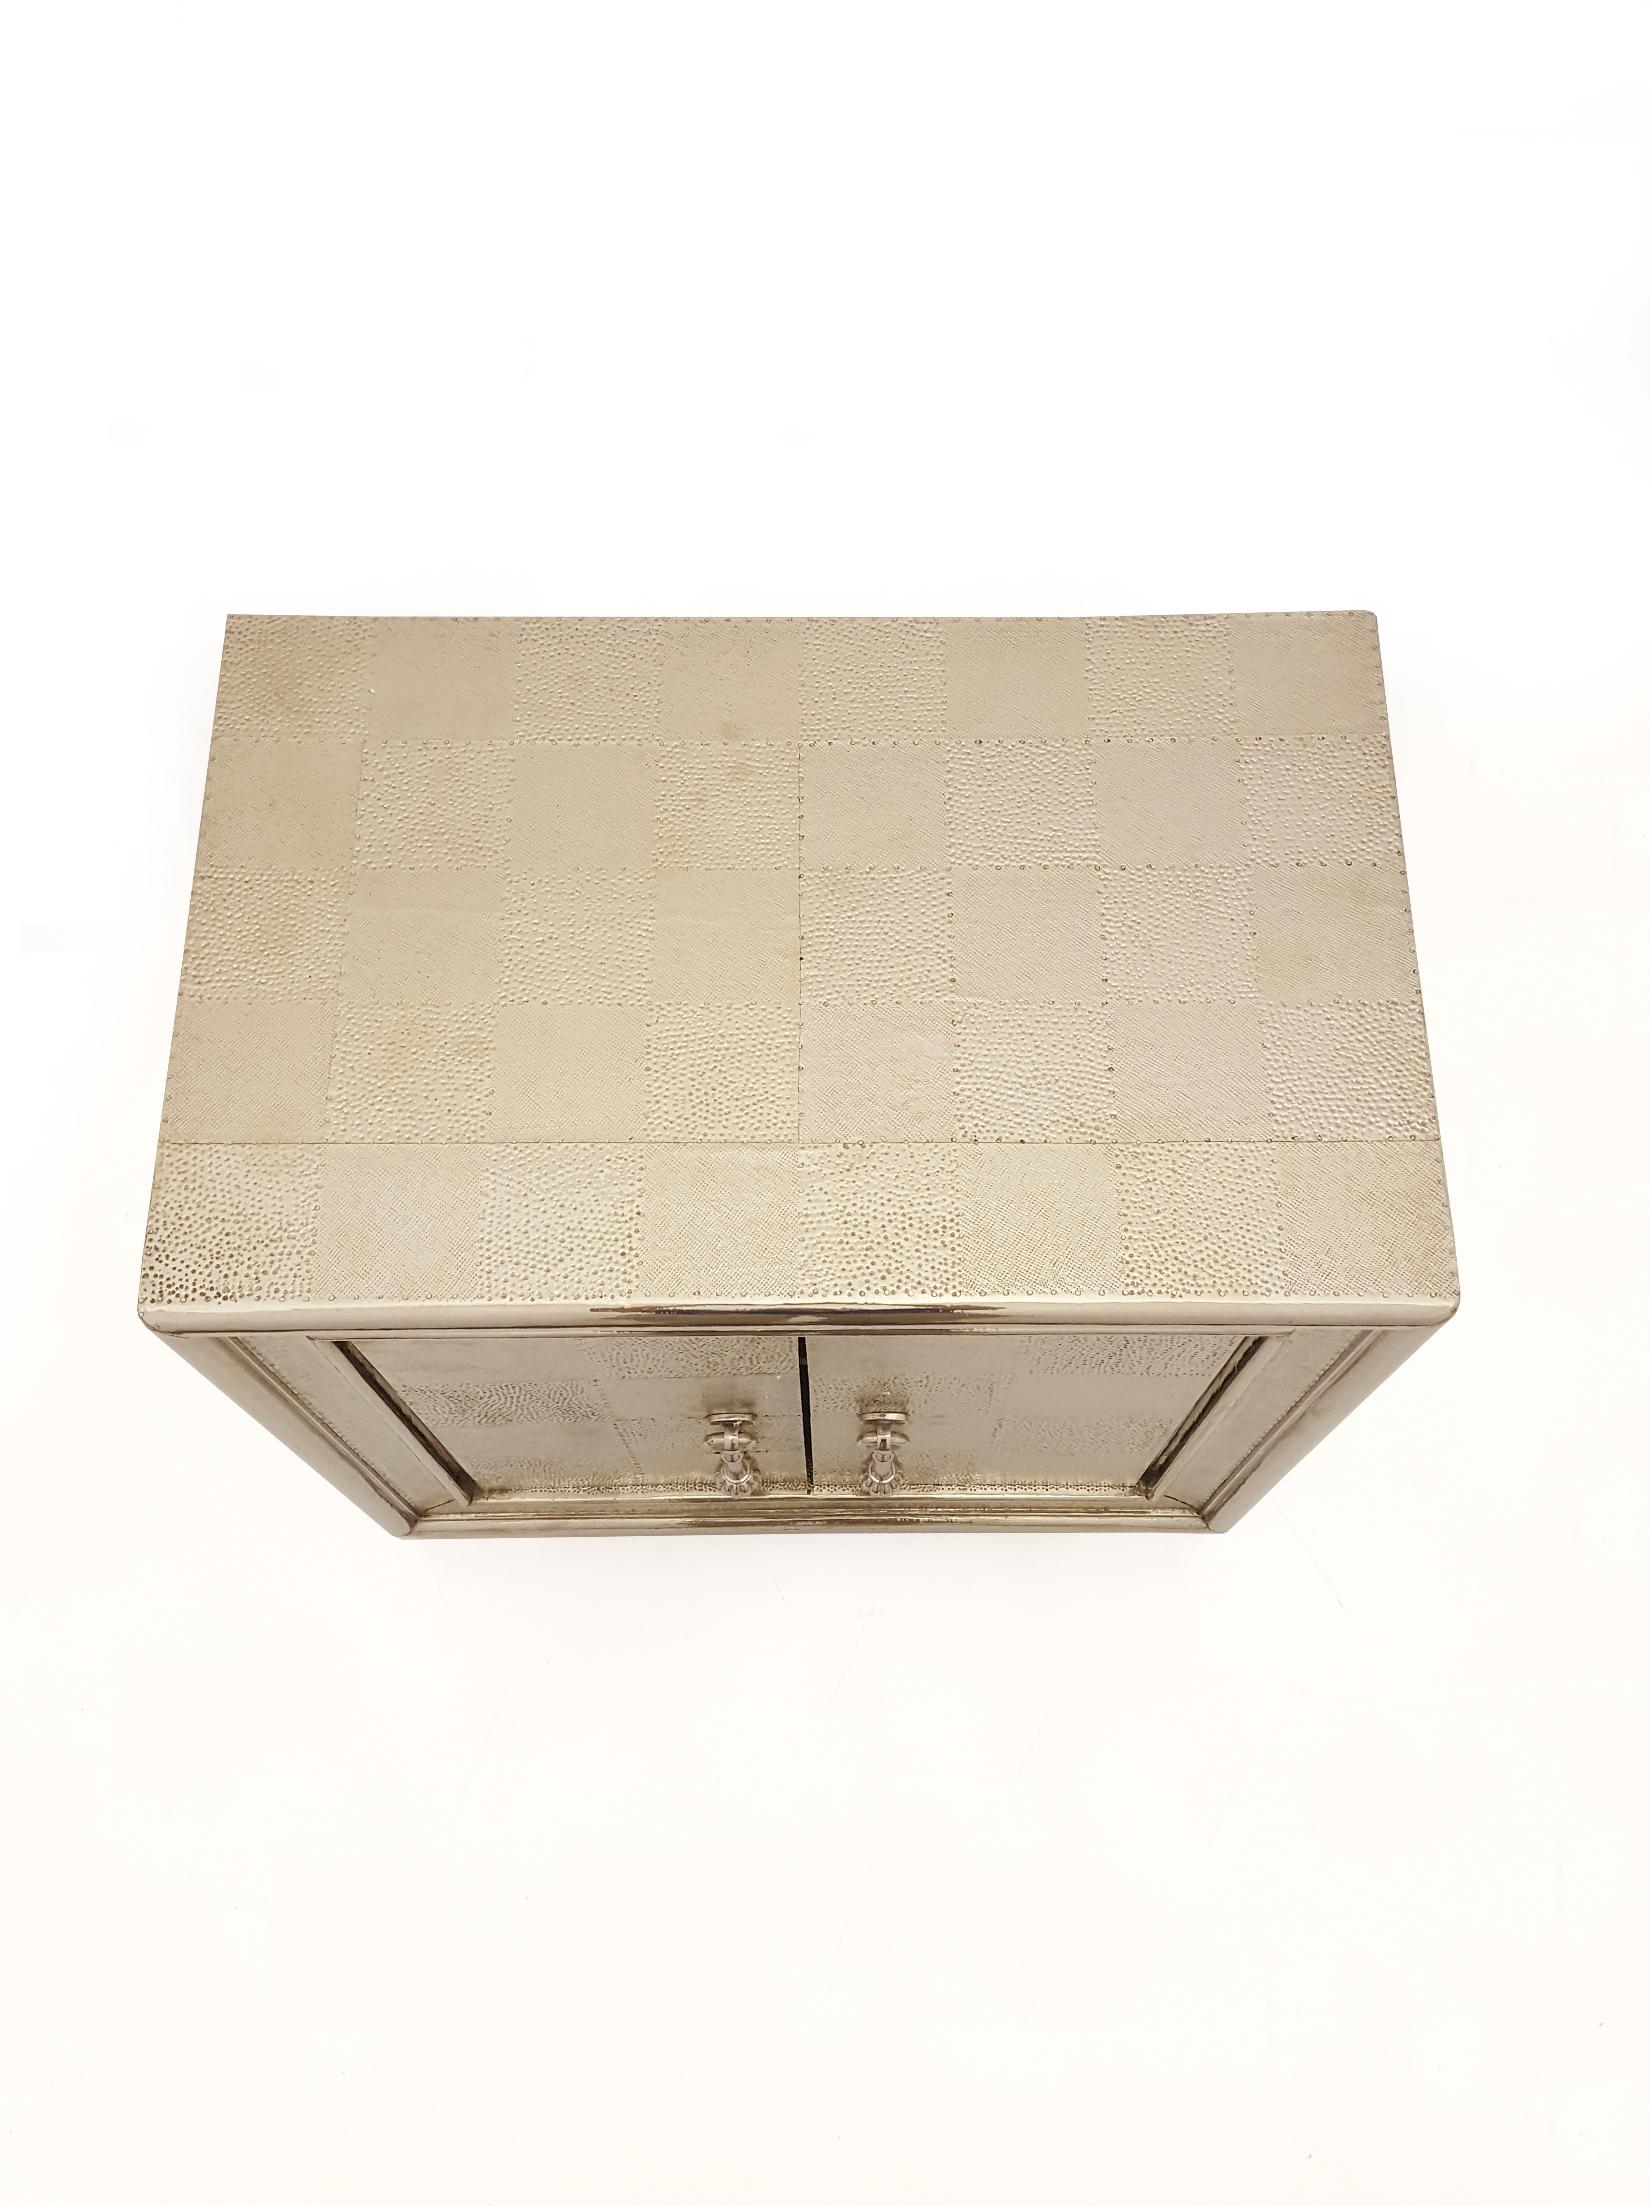 Carre Nightstand in White Bronze Clad Over Teakwood Handcrafted in India For Sale 1